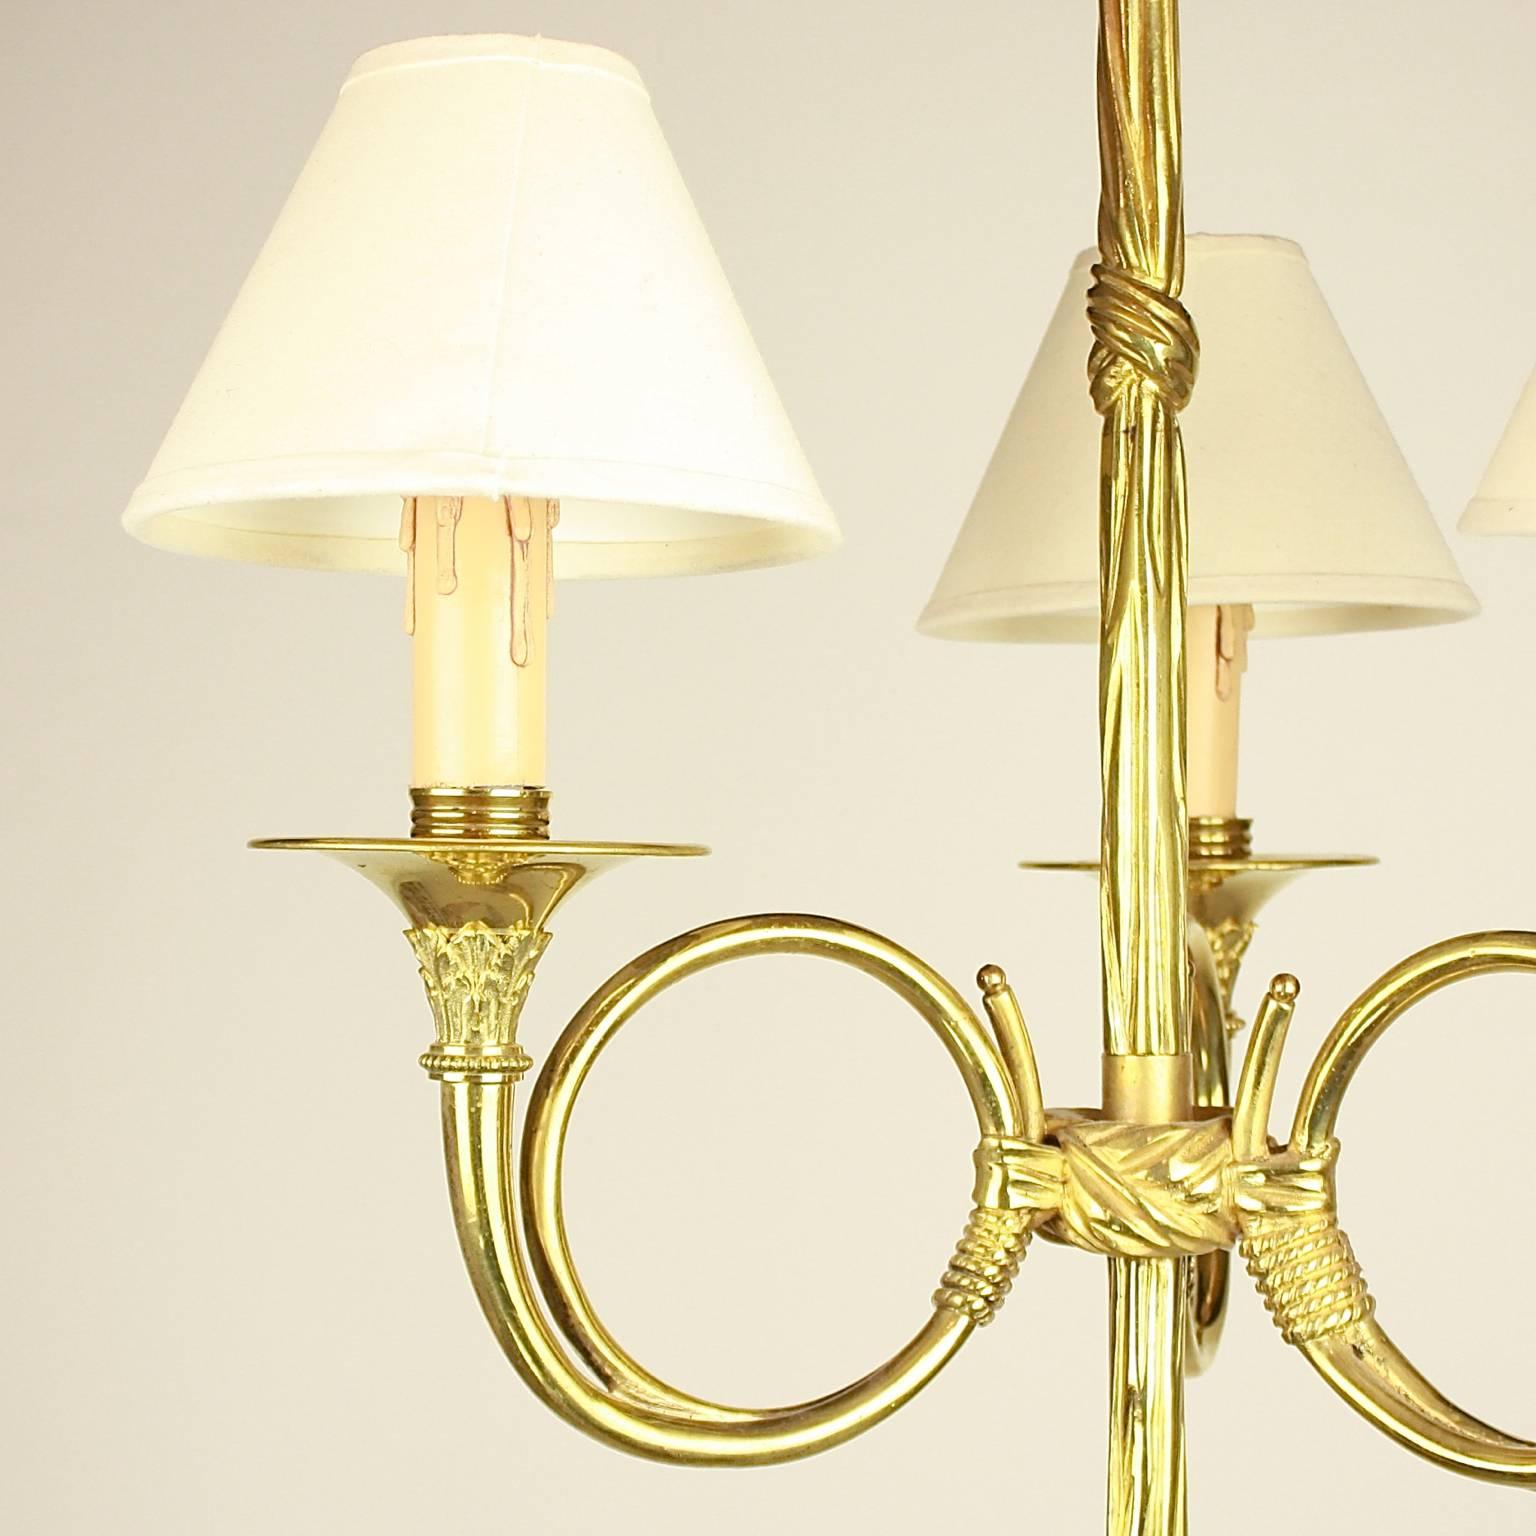 A bronze three-light 'hunting horn' chandelier made by Maison Baguès. The central baluster in the shape of drapery issuing three bugle-form arms terminating in circular wax pans and candle-form lights, each light surmounted by a small